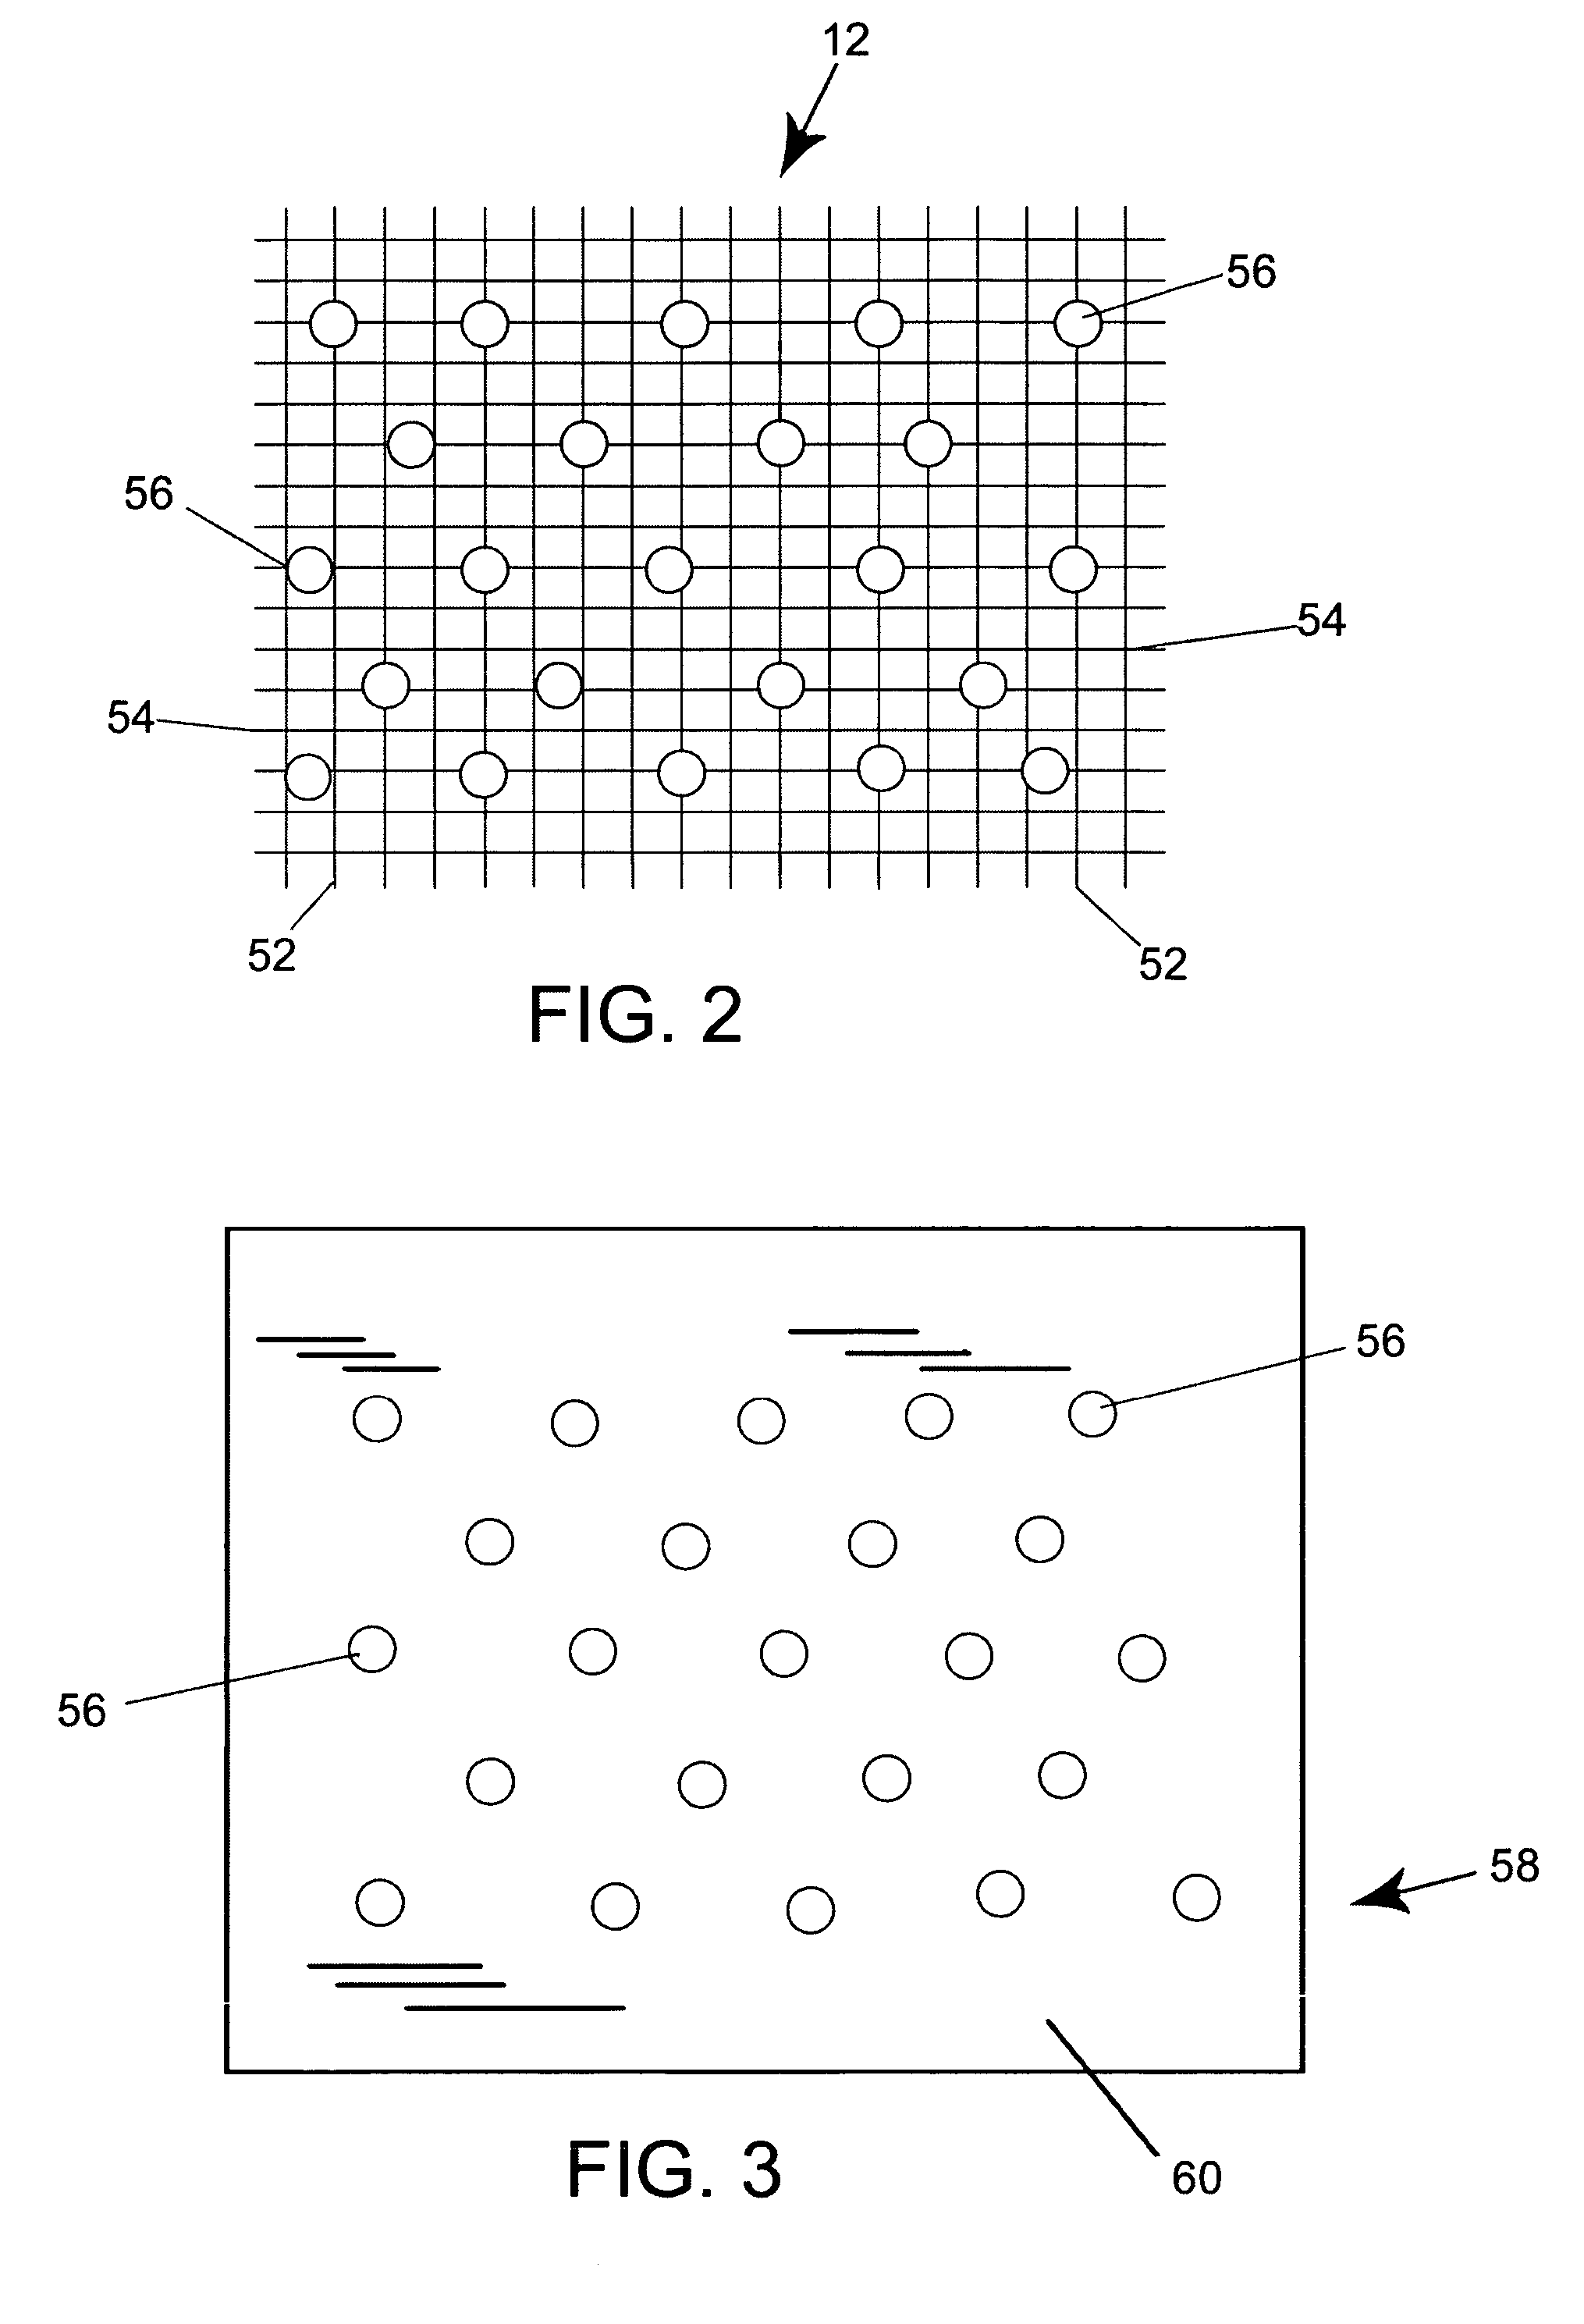 Method of fabricating a belt and a belt used to make bulk tissue and towel, and nonwoven articles and fabrics